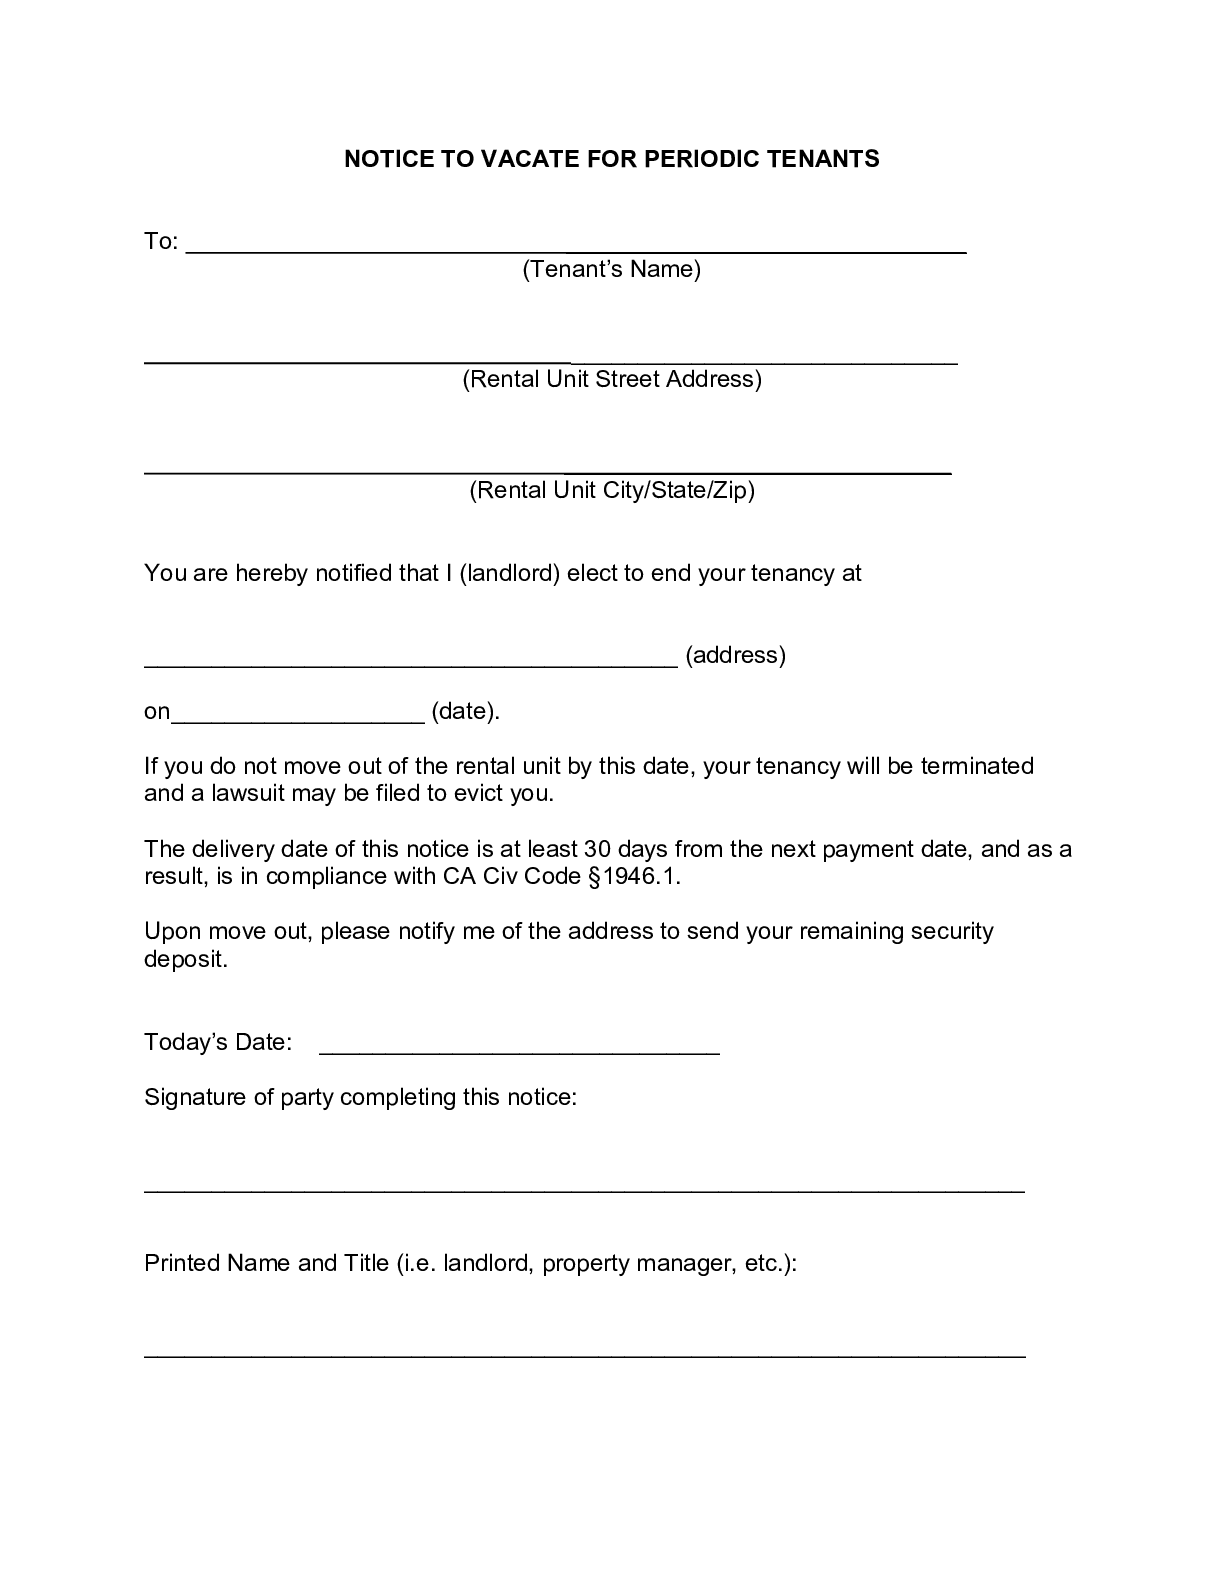 free-california-eviction-notice-form-2021-notice-to-vacate-pdf